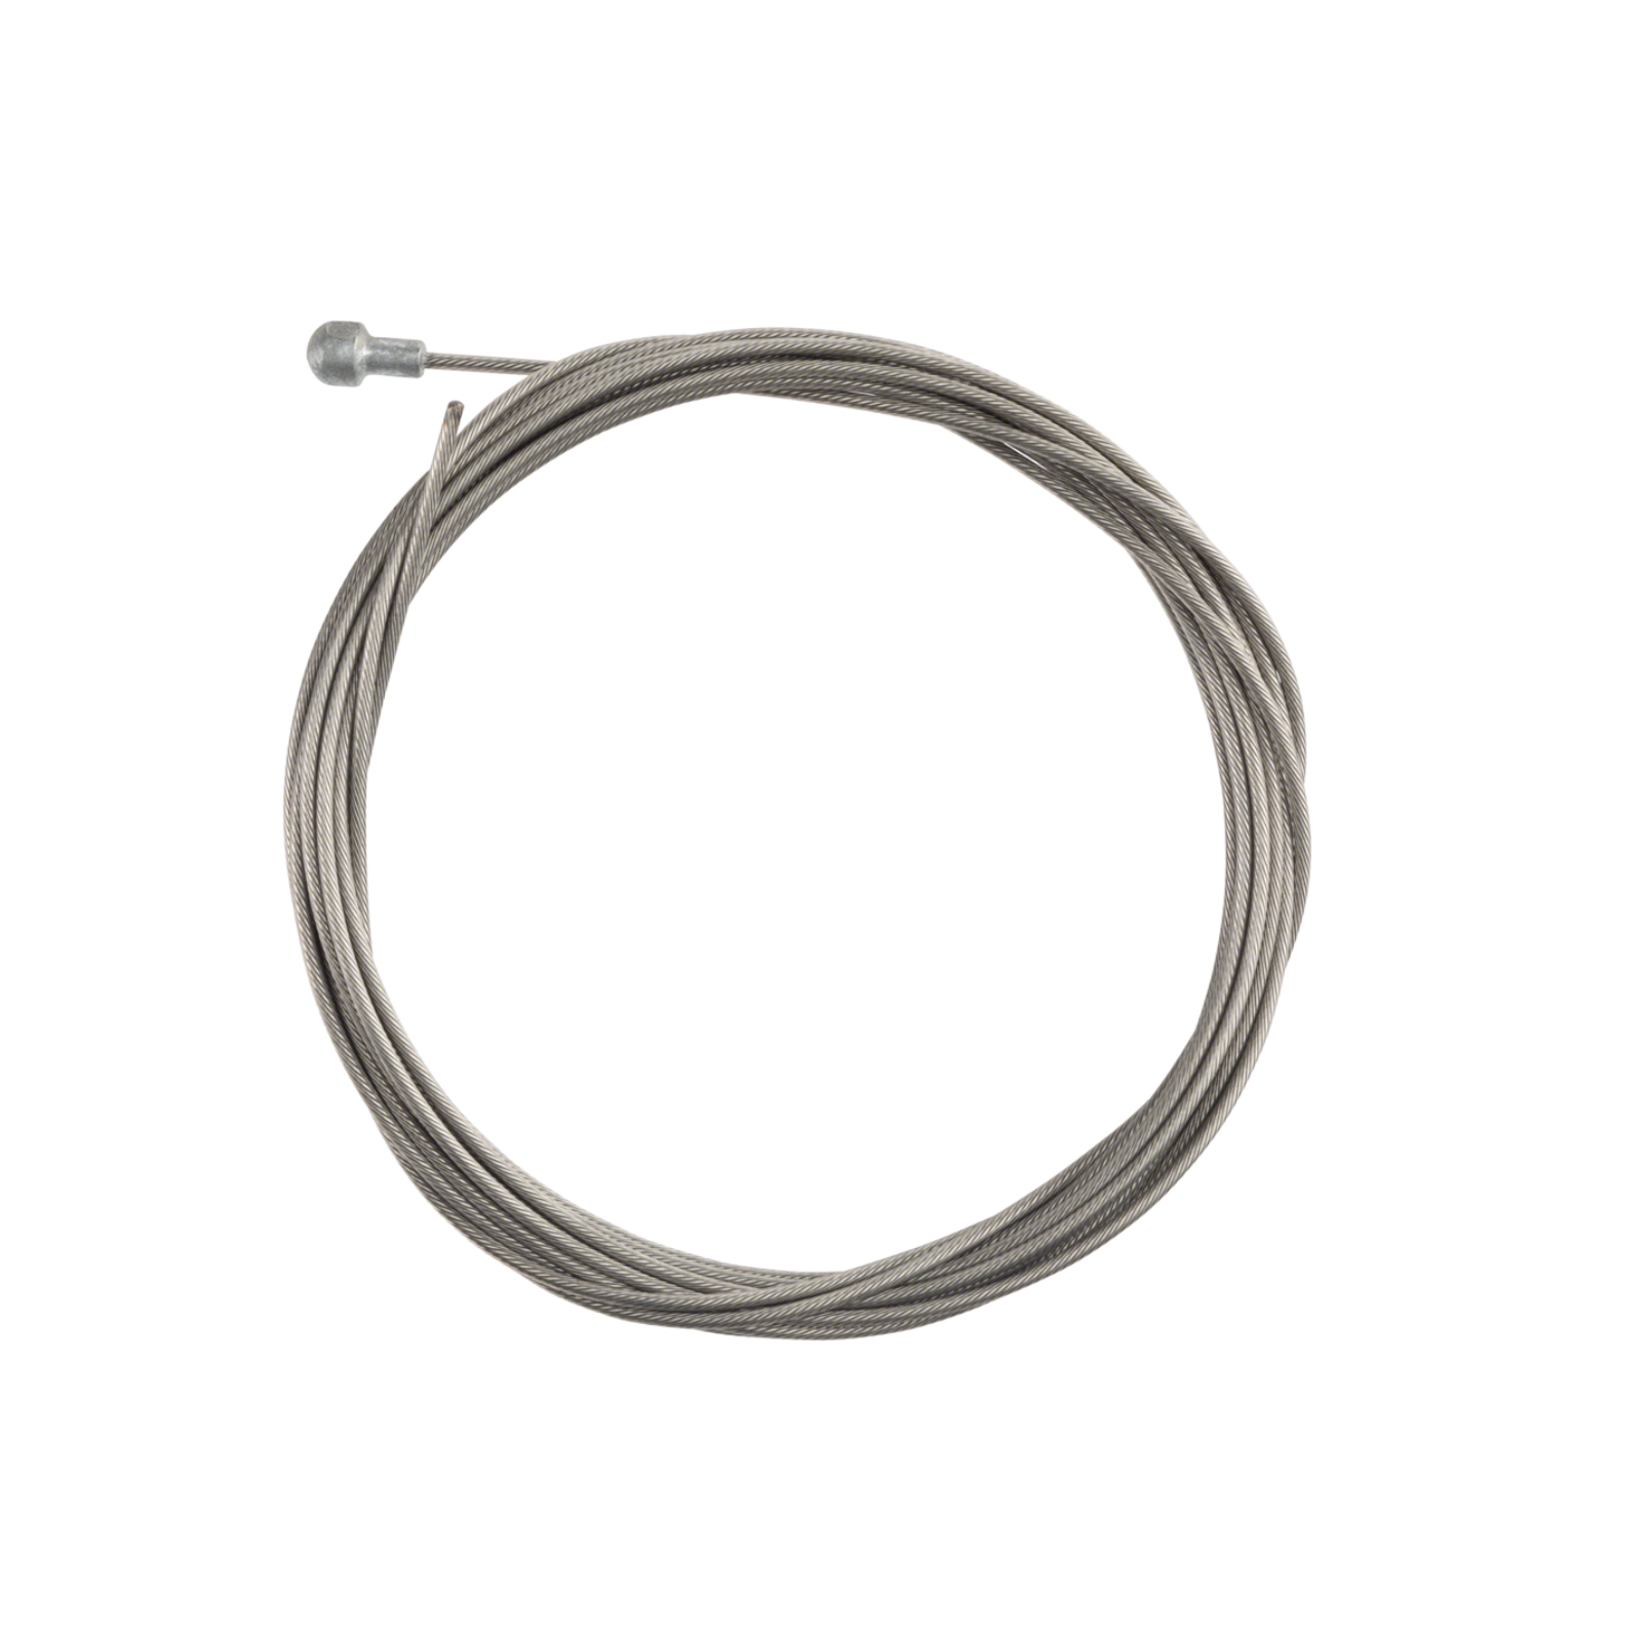 Jagwire JAGWIRE - SPORT BRAKE CABLE SLICK STAINLESS 1.5x3500MM SRAM/SHIMANO ROAD TANDEM